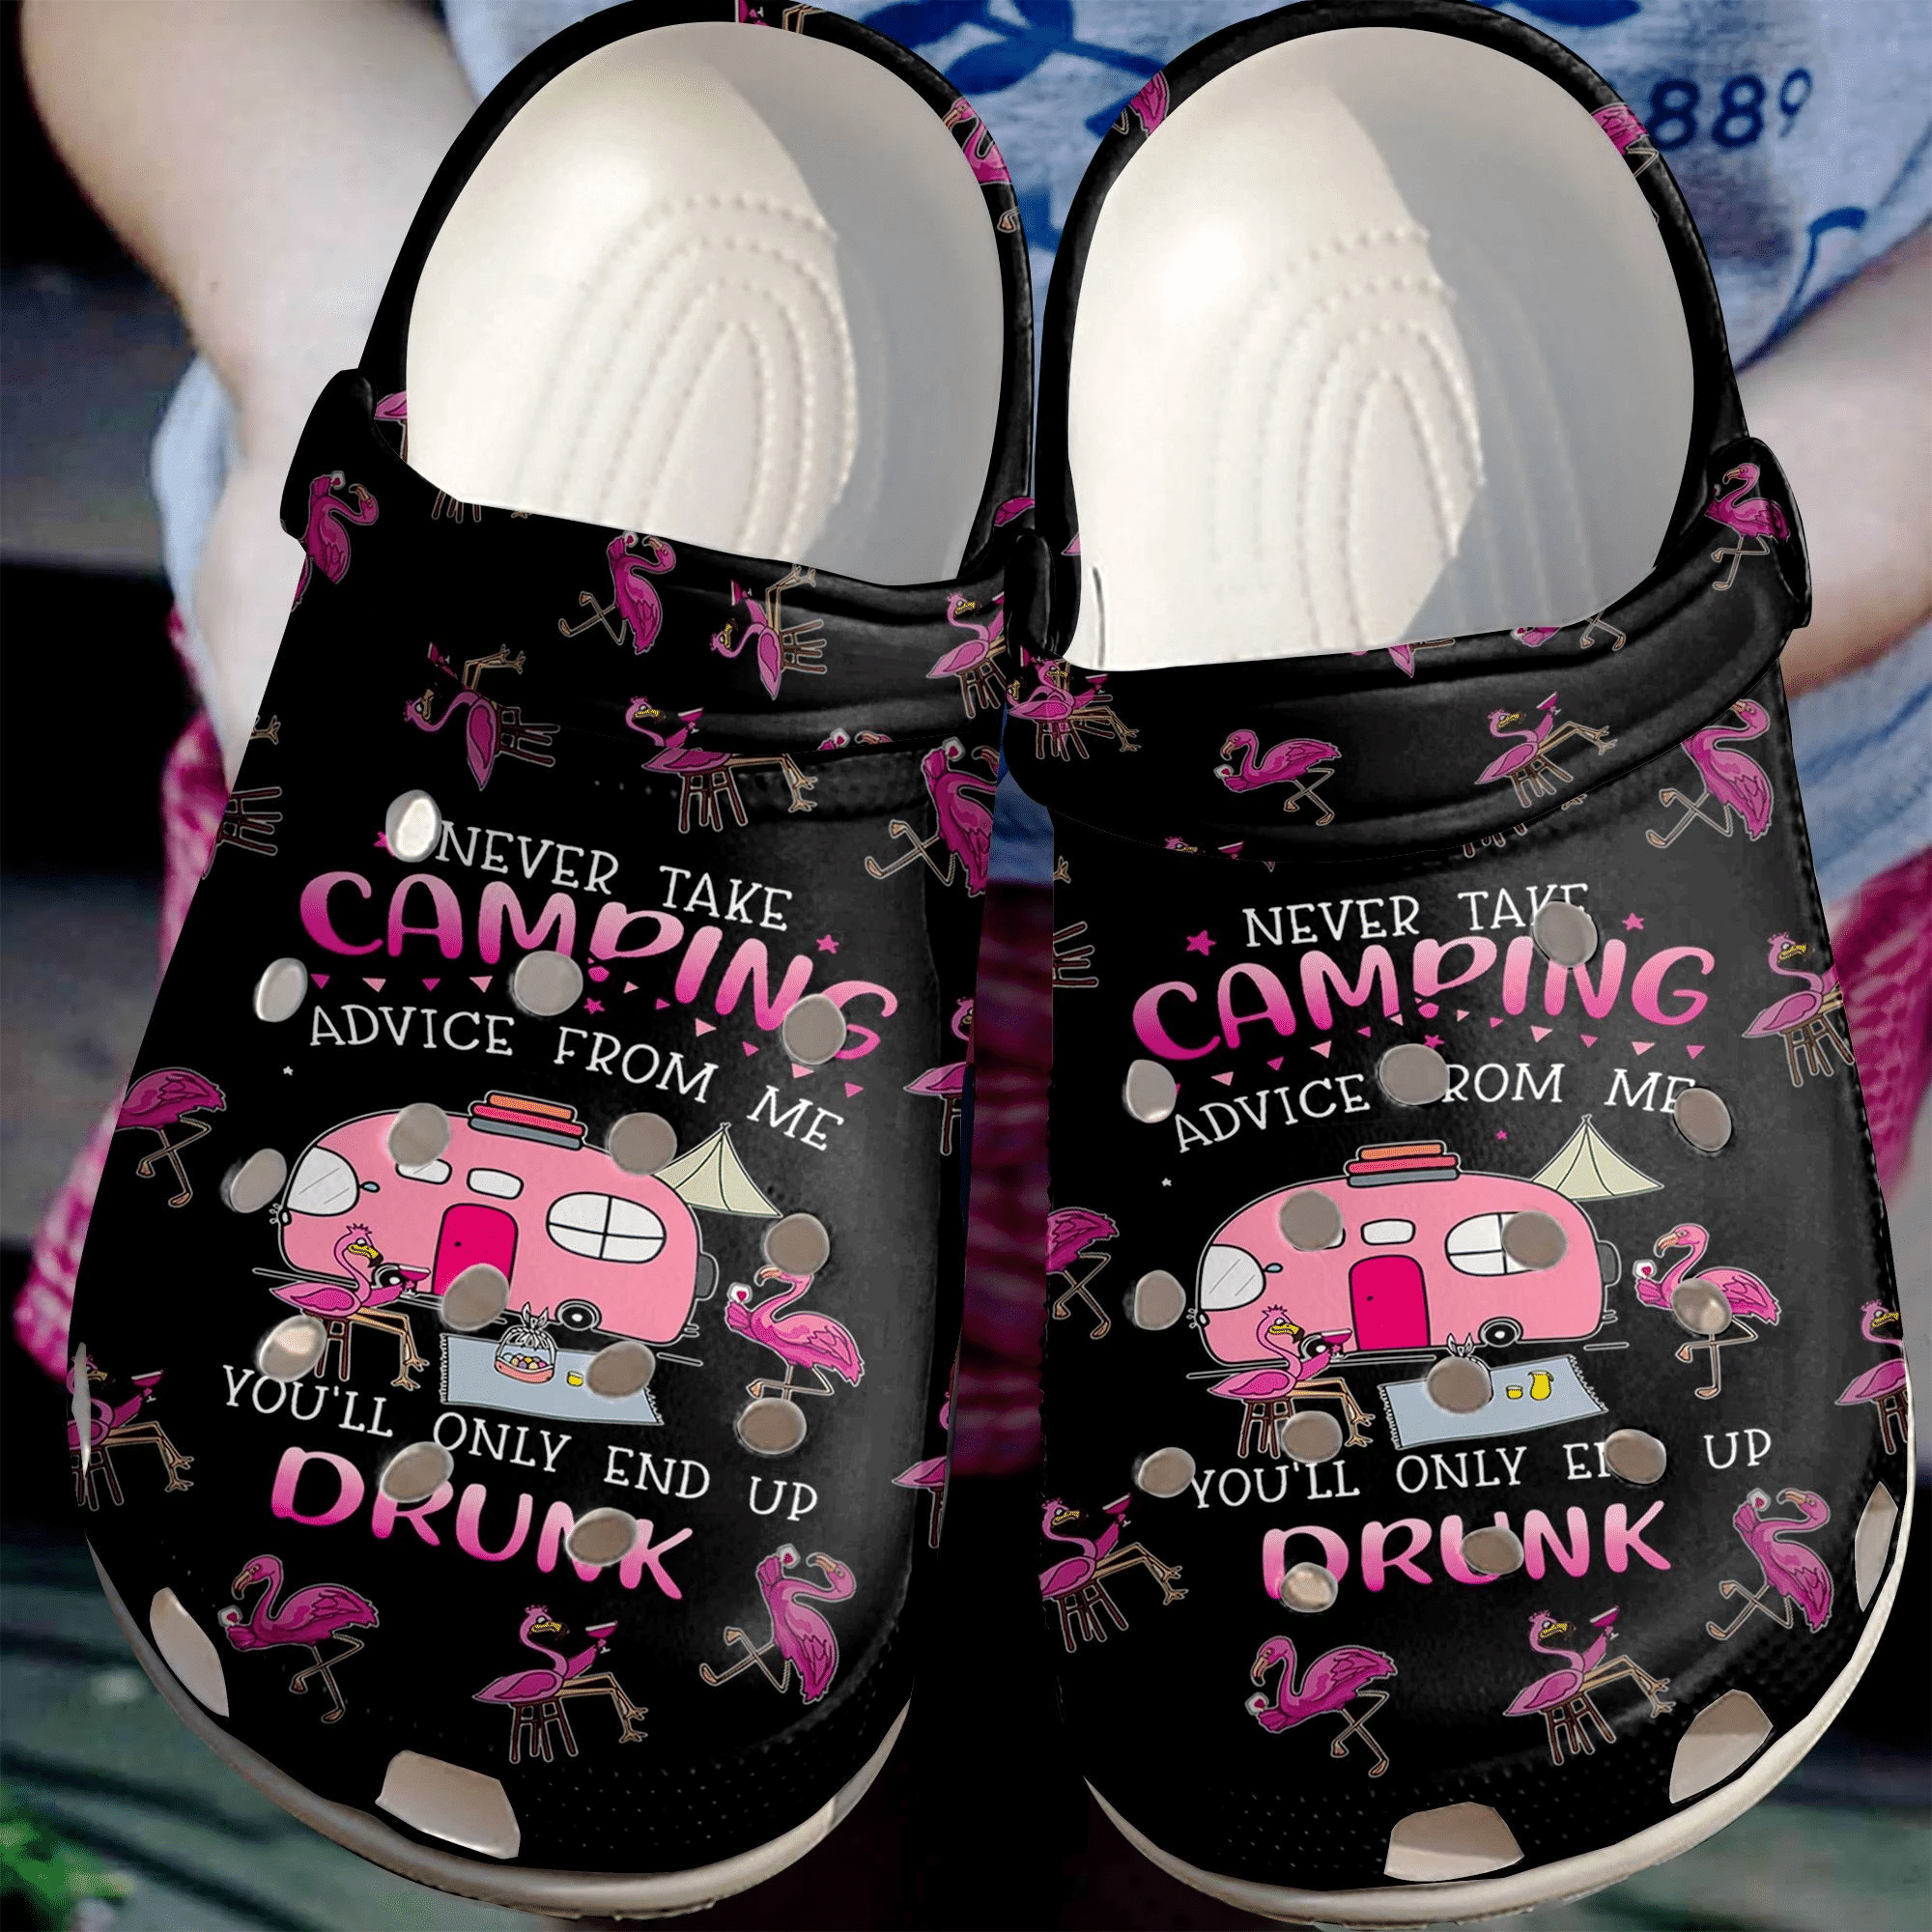 Camping Advices From Me Flamingo And Bus Camp Gift For Lover Rubber Crocs Crocband Clogs, Comfy Footwear